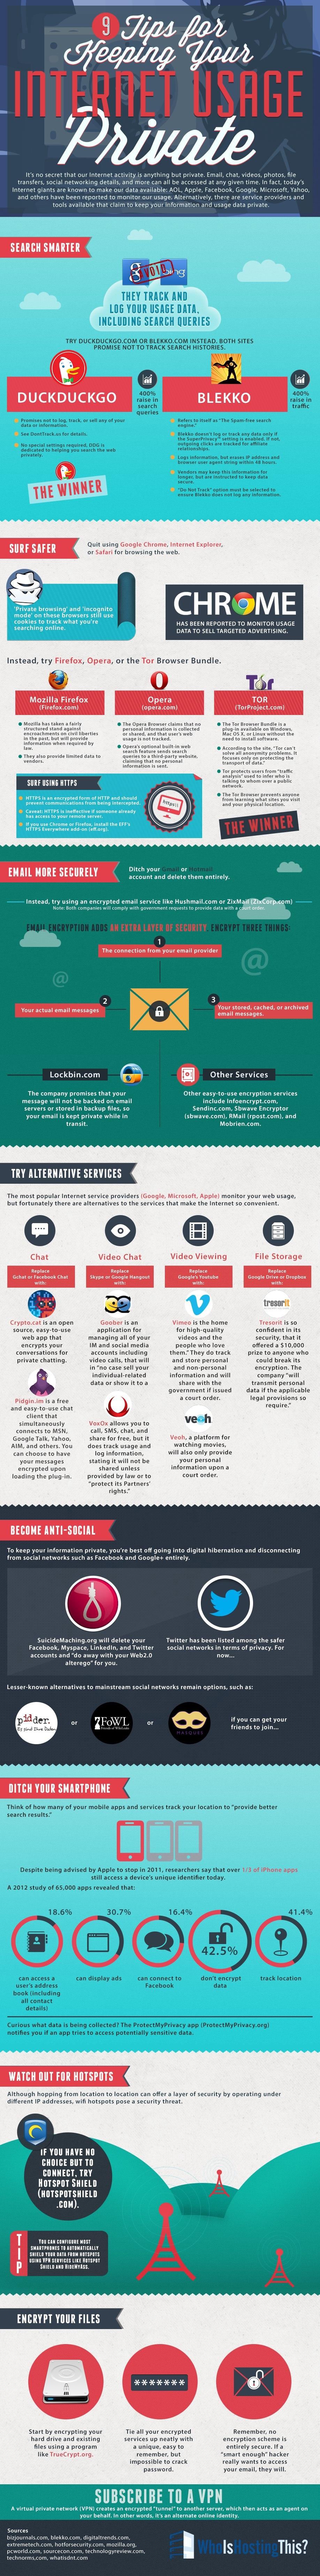 keep-internet-footprint-private-infographic